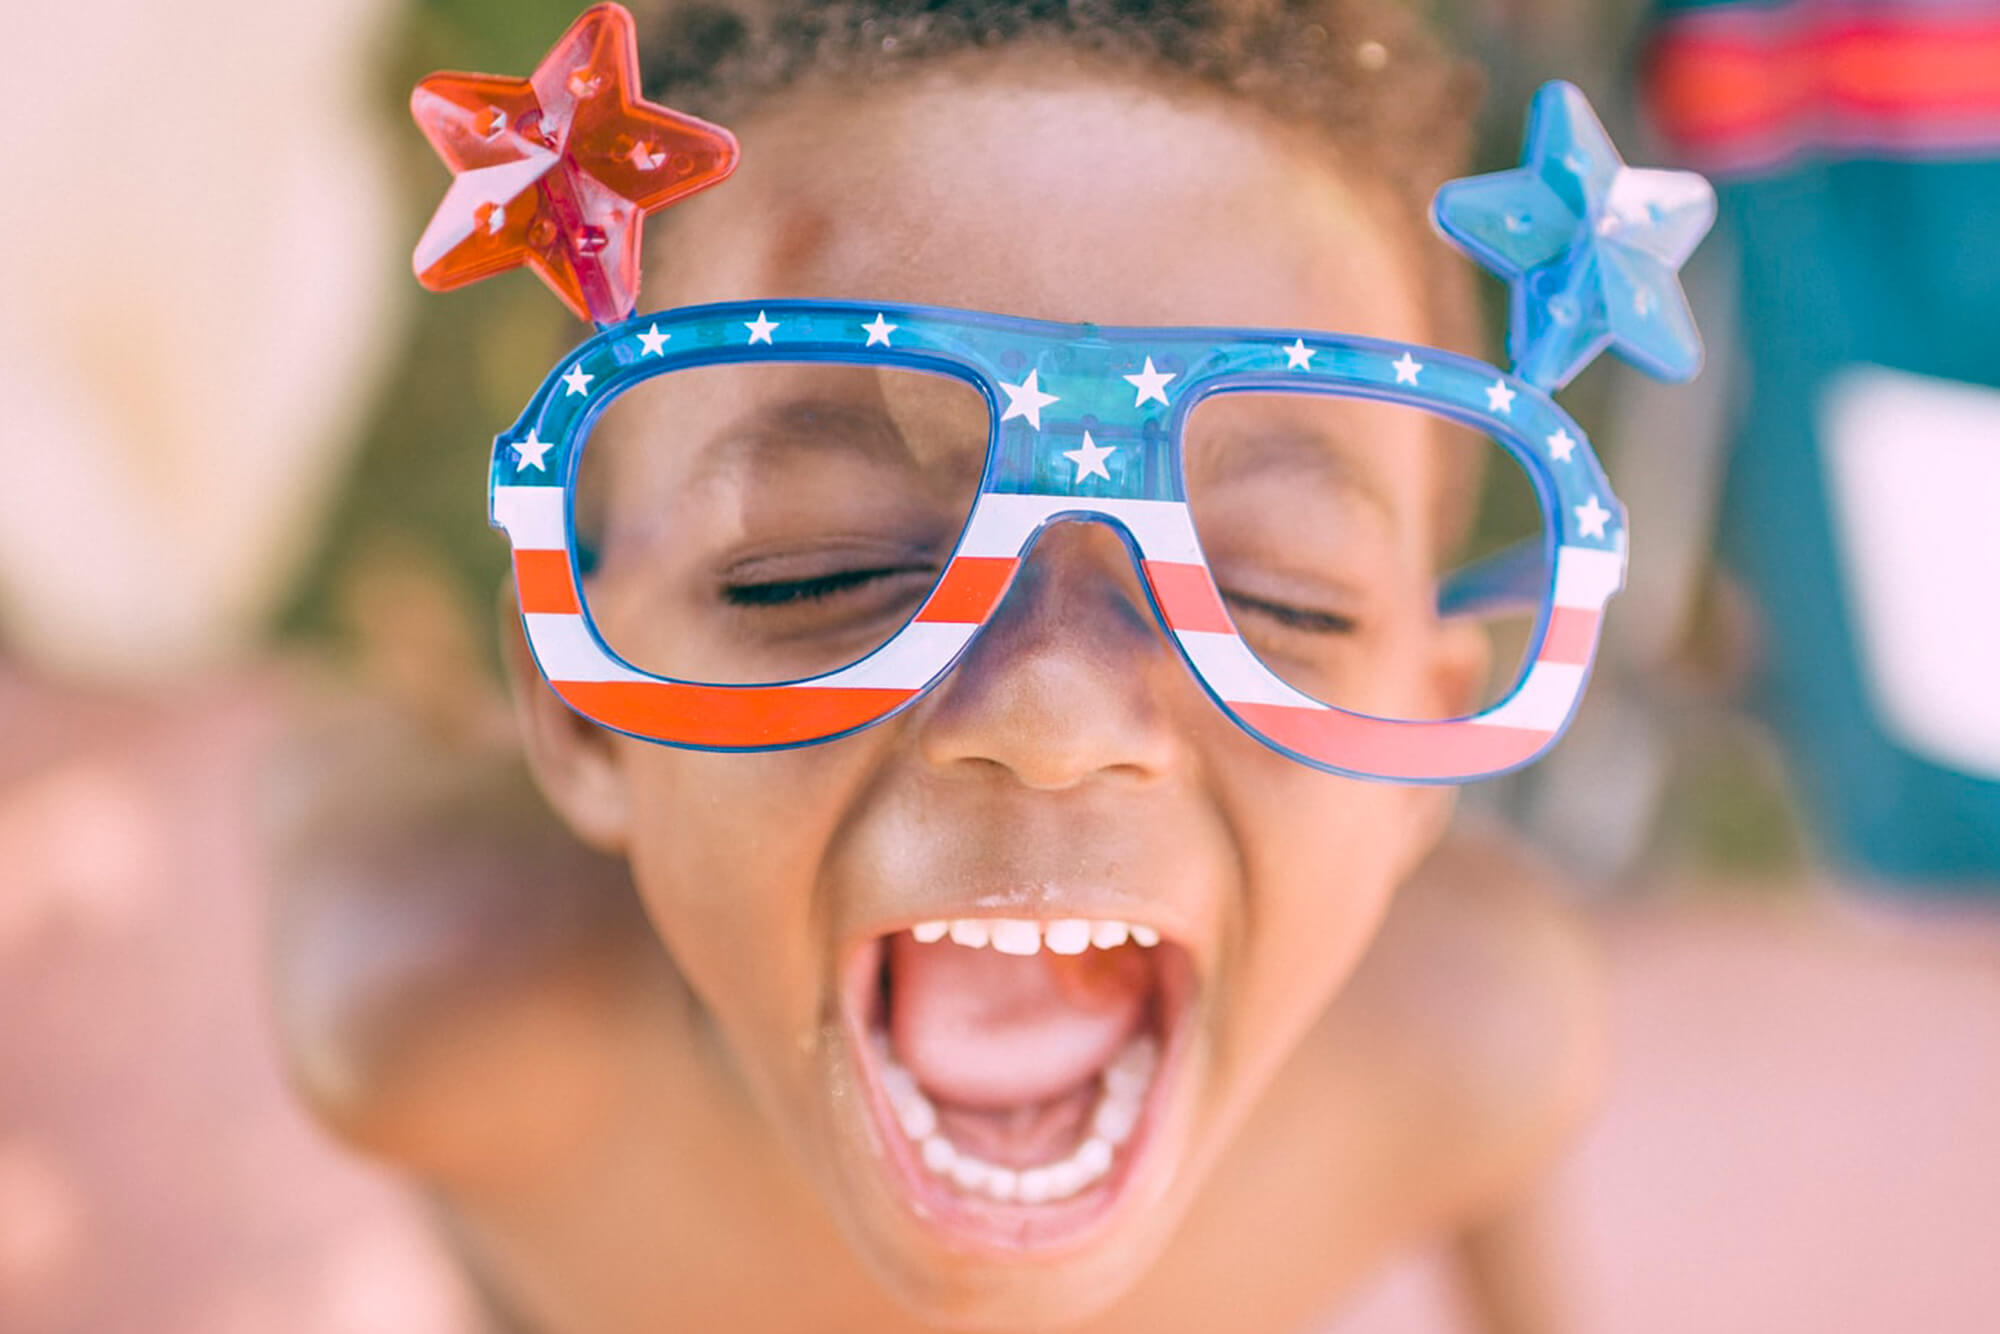 Child happily yelling with American flag glasses adorned with stars